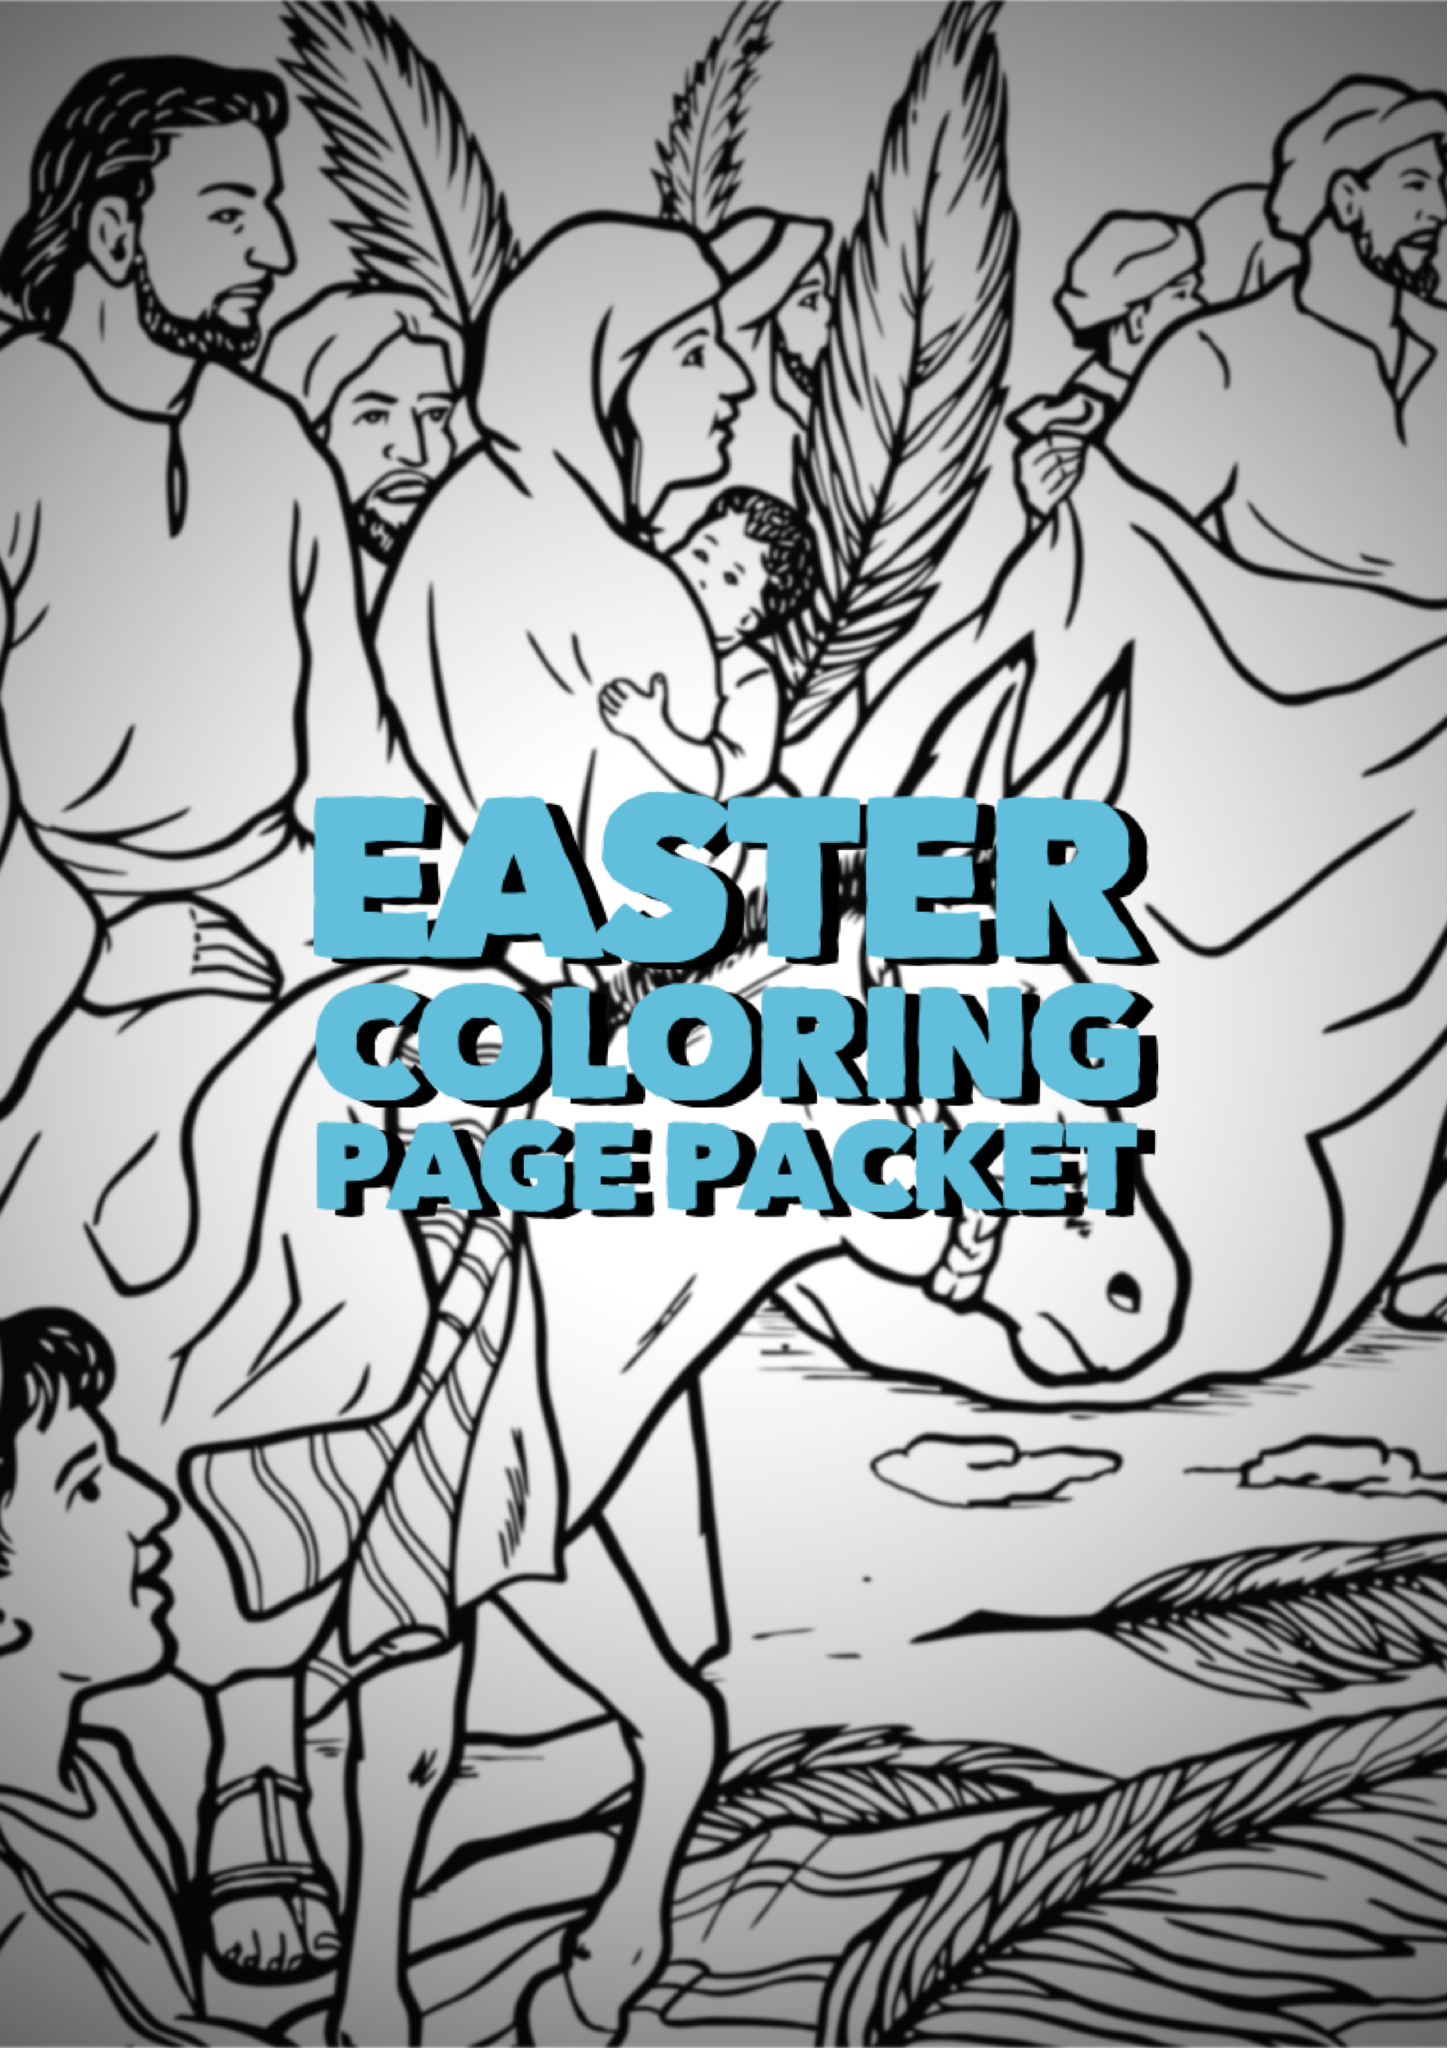 Easter Coloring Page Packet Printable PDF Download   Bible ...